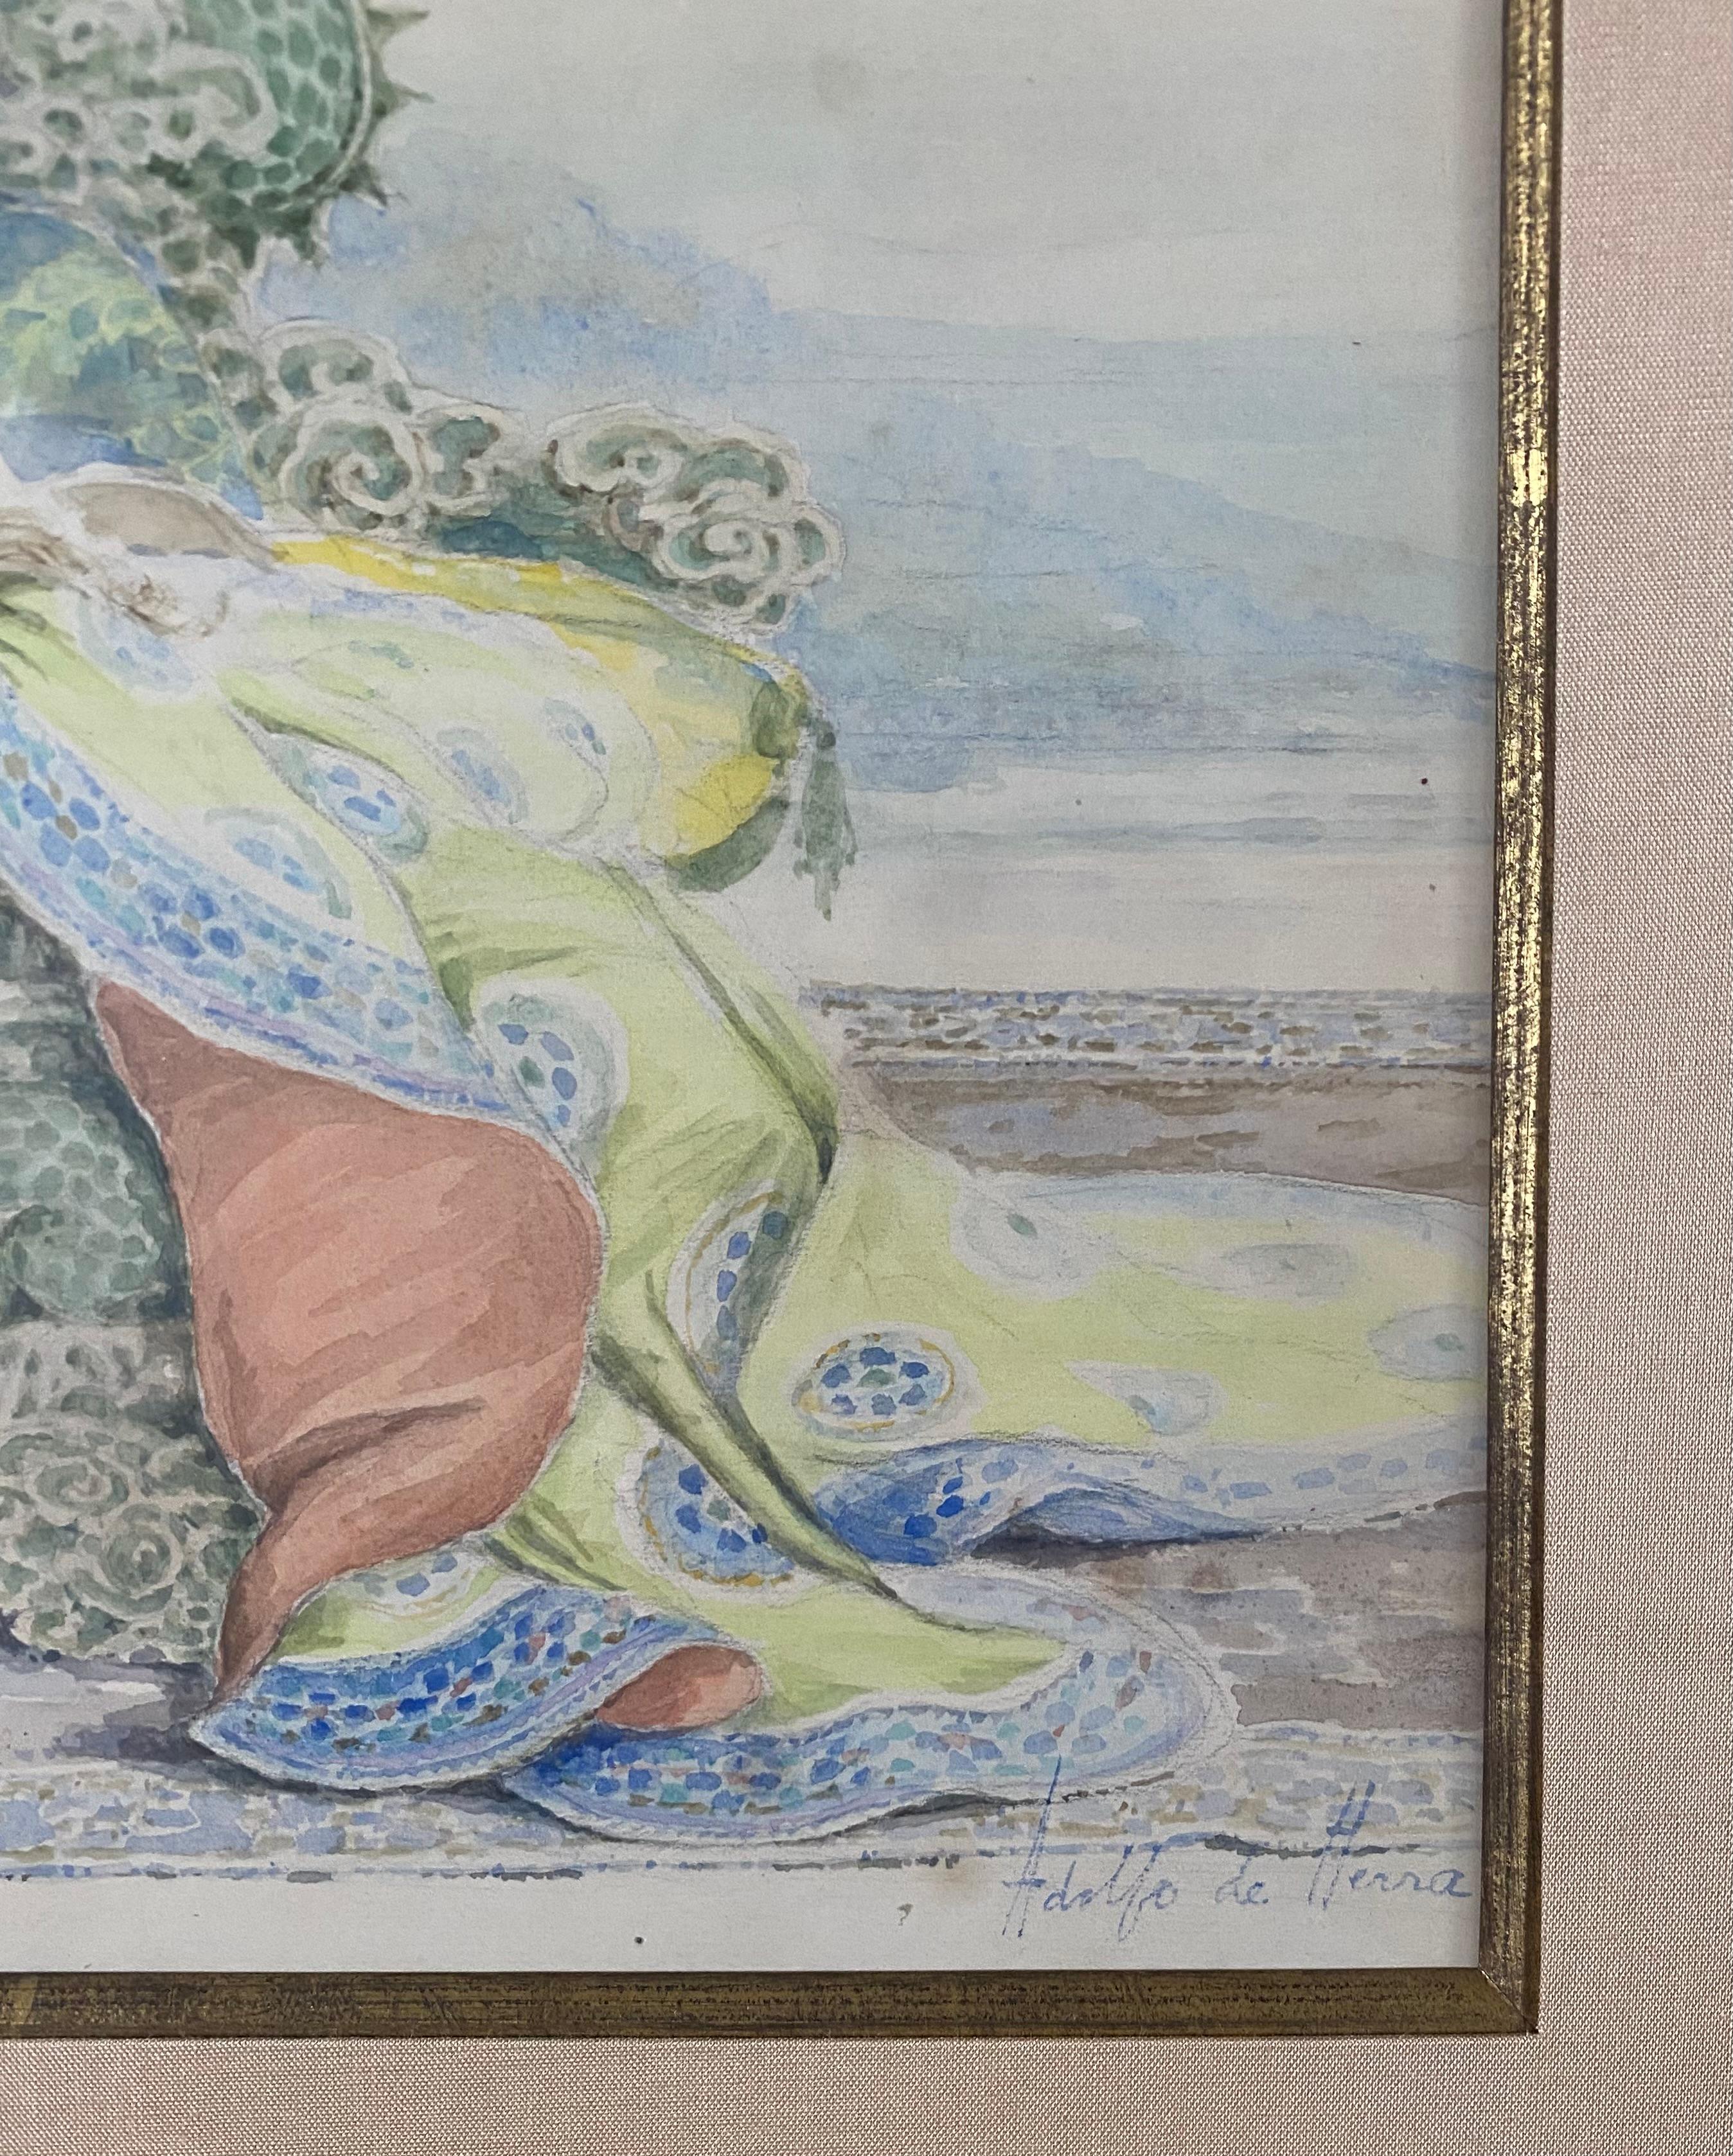 Adolfo de HERRA
Active around 1900 student of Gustave Moreau

Woman with dragon, Saint Marguerite?
Watercolor
Signed lower right 64 x 44 cm framed (47 x 26,5 cm sheet)
Very good condition, probably original frame